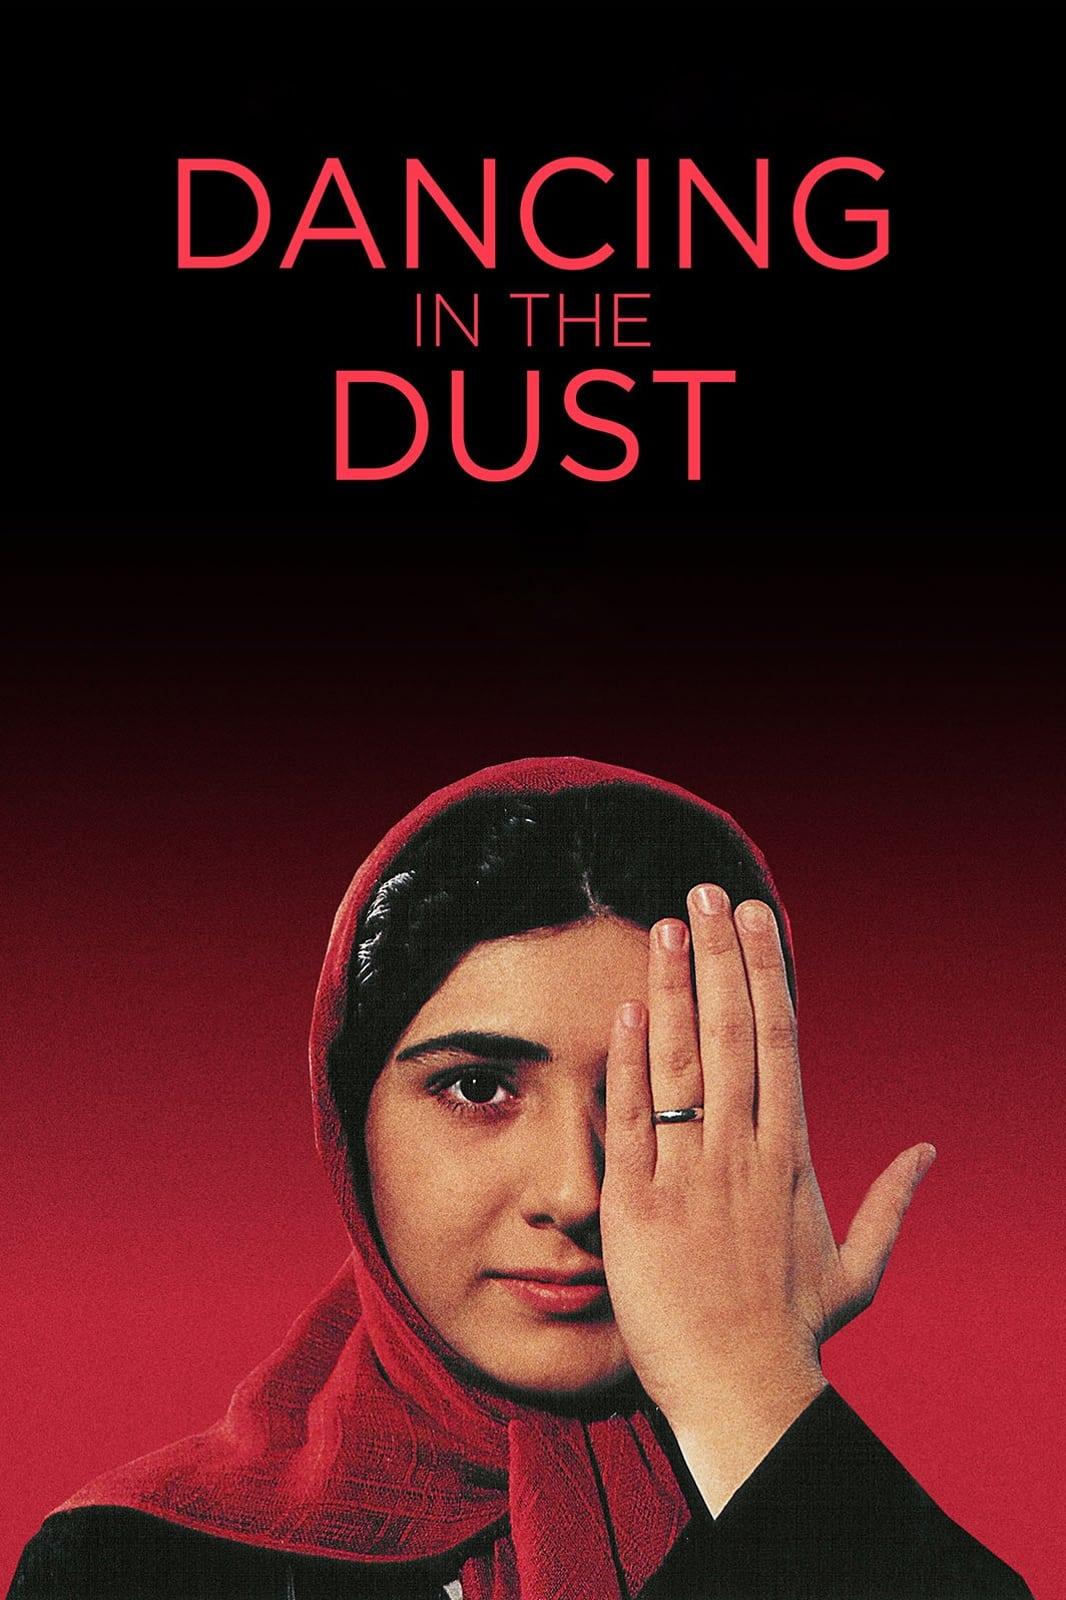 Dancing in the Dust poster